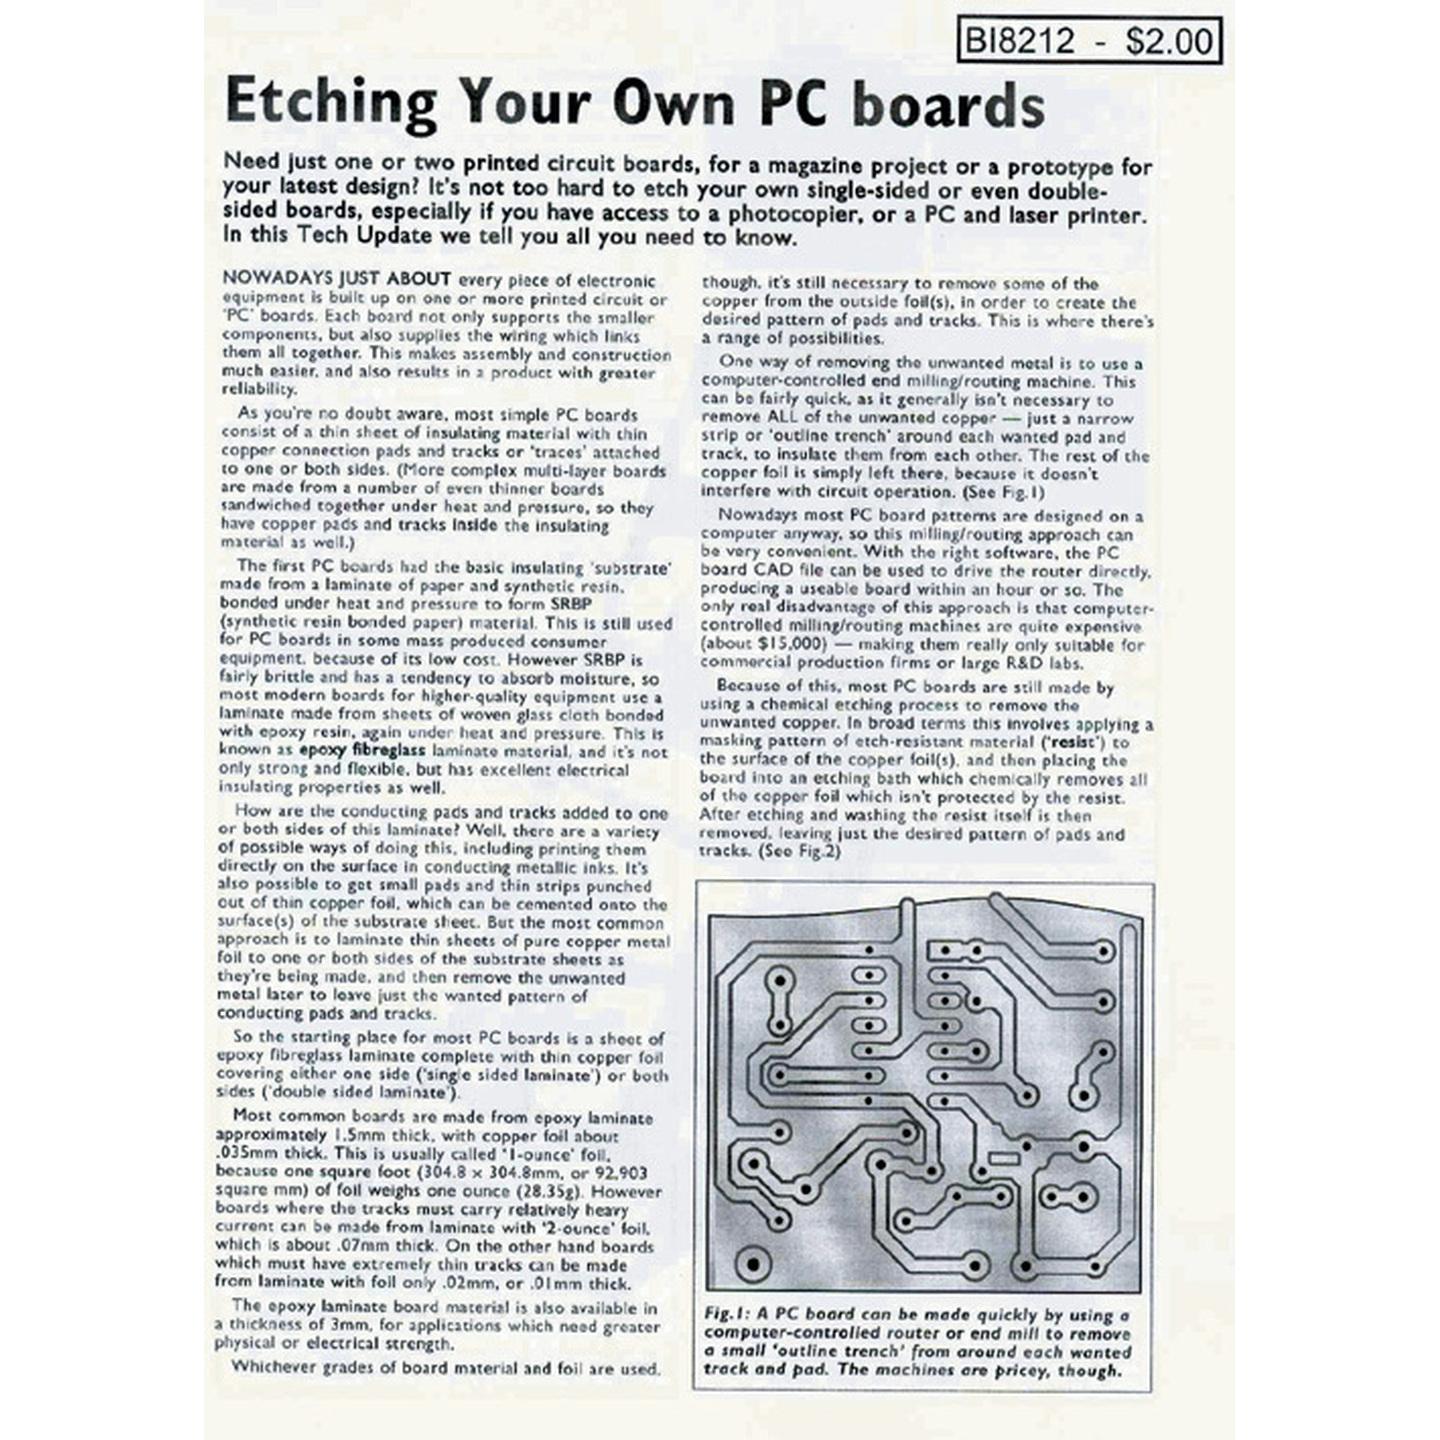 Etch Your Own PC Boards Booklet